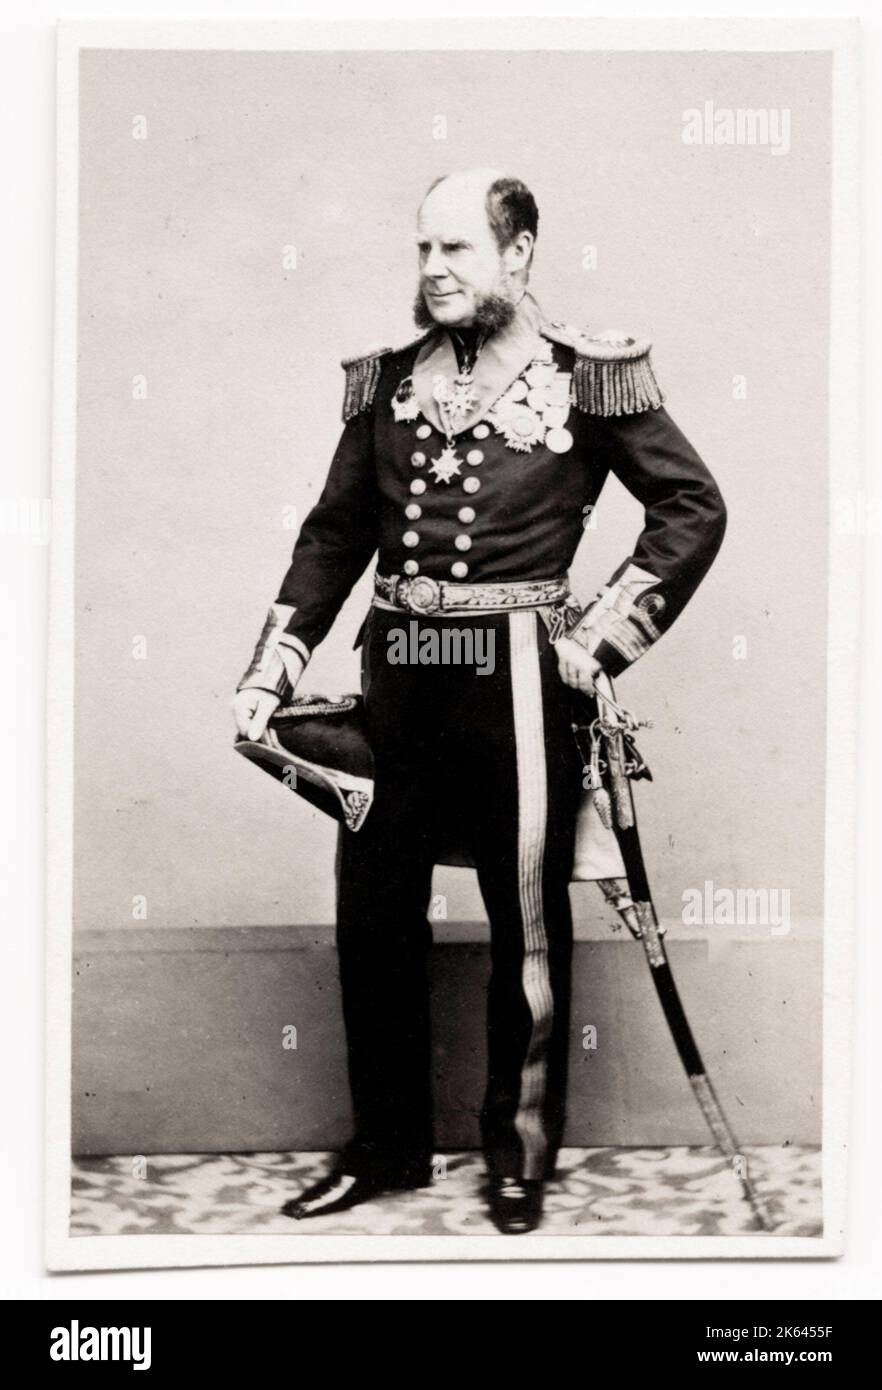 Vintage 19th century photograph: Admiral of the Fleet The Honourable Sir Henry Keppel GCB, OM (14 June 1809 - 17 January 1904) was a Royal Navy officer. Stock Photo